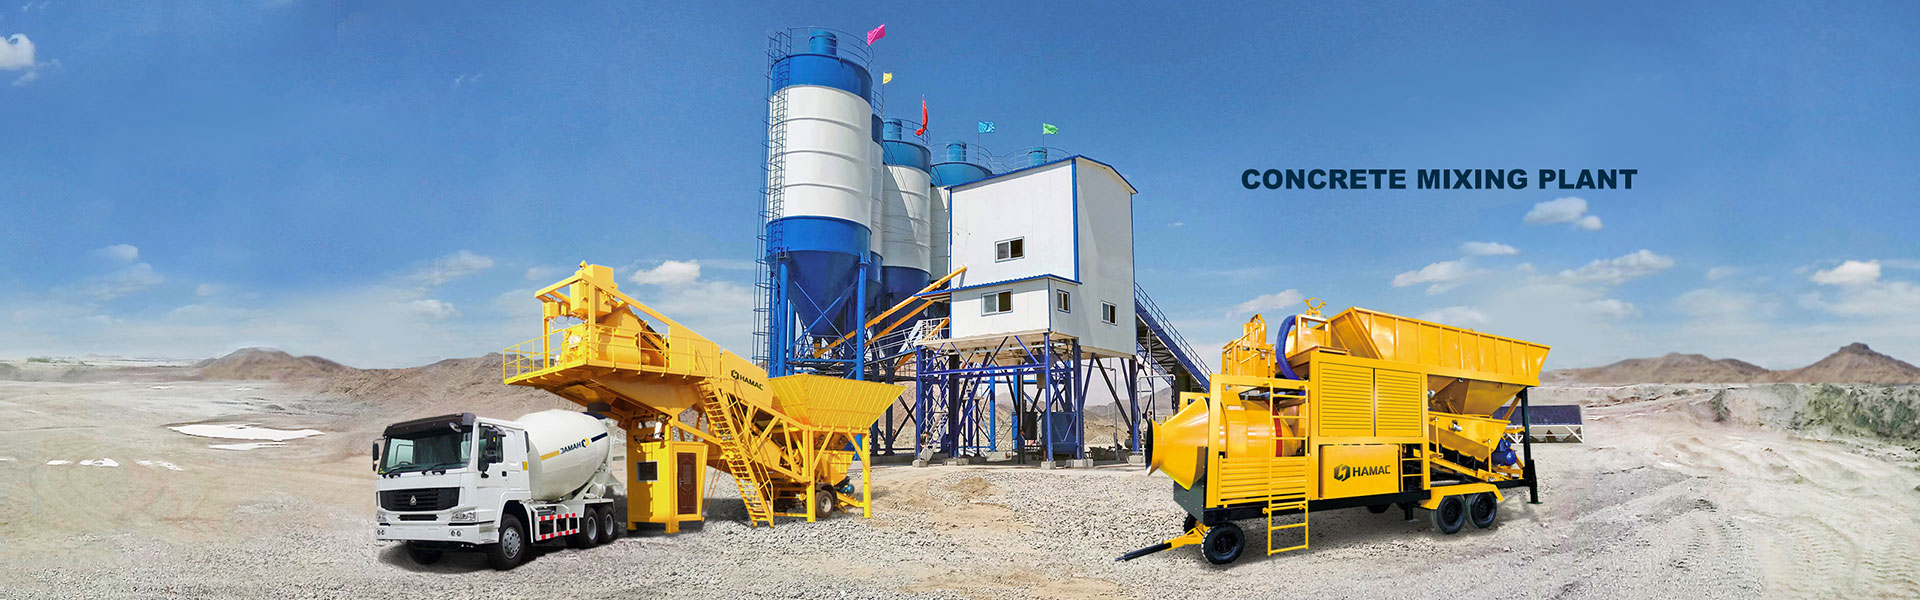 Concrete Batching Plant for Sale Philippines - High Performance